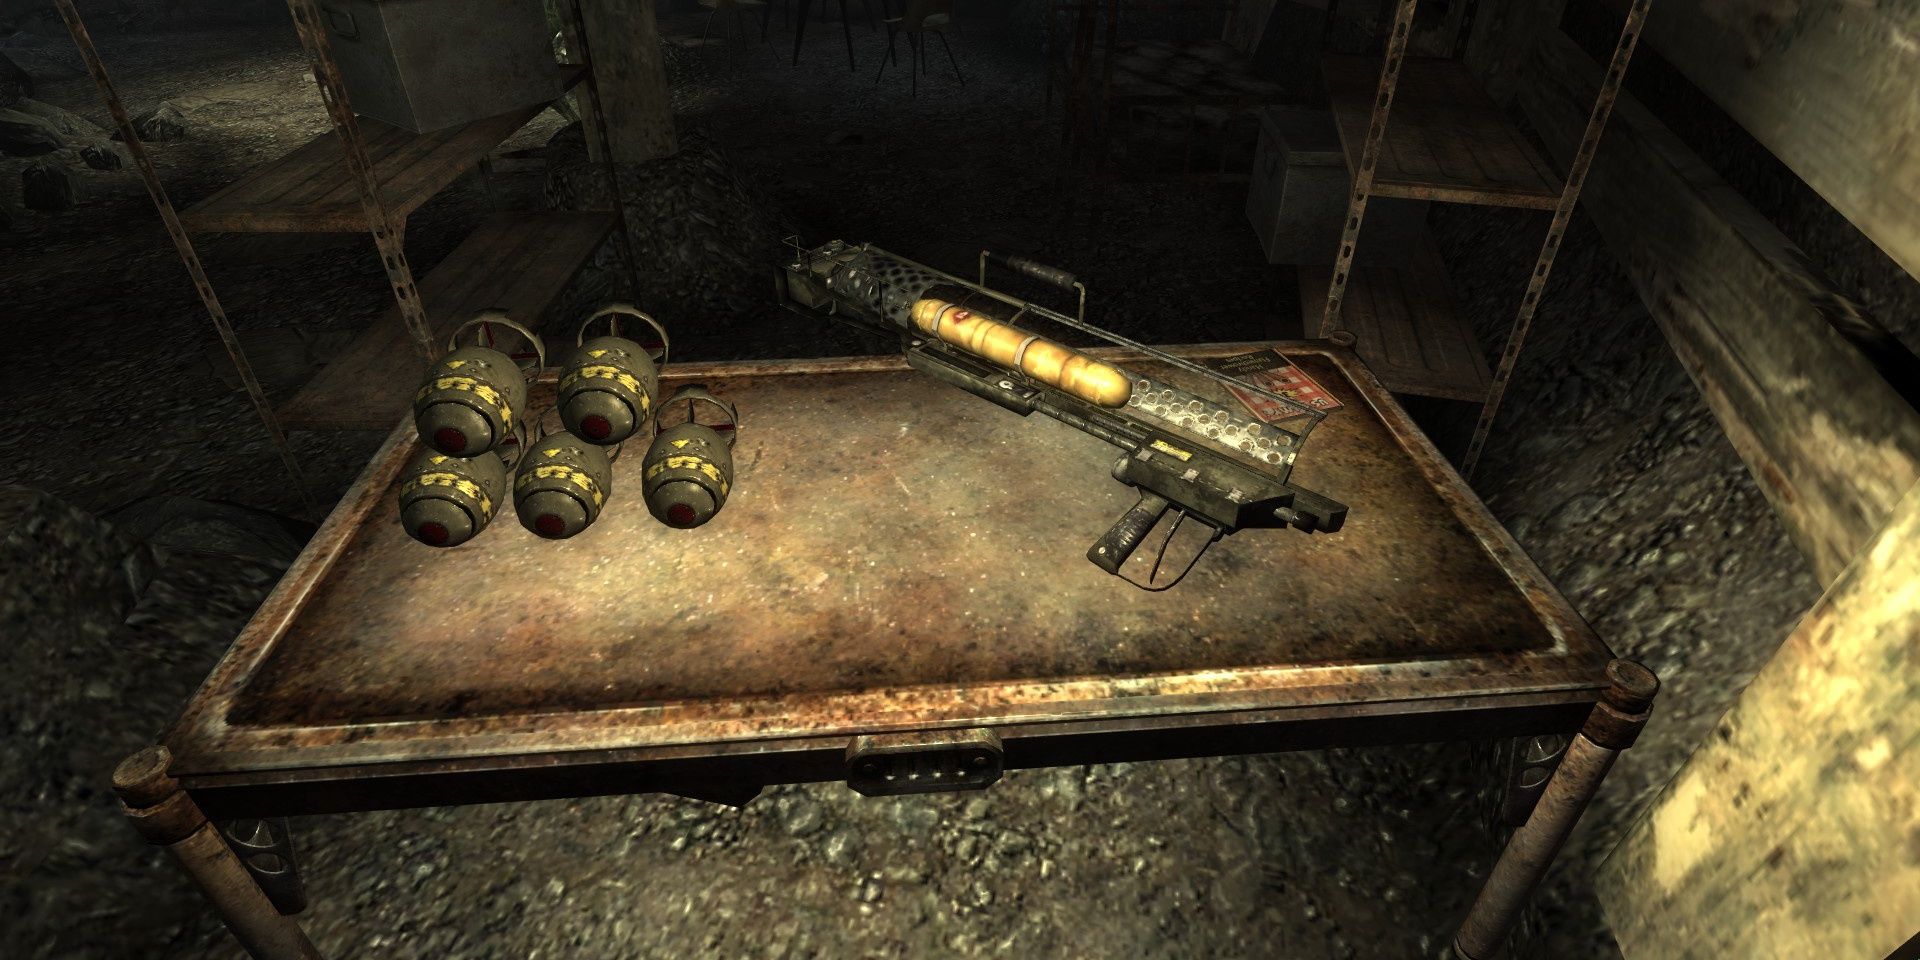 fallout 3 weapon list